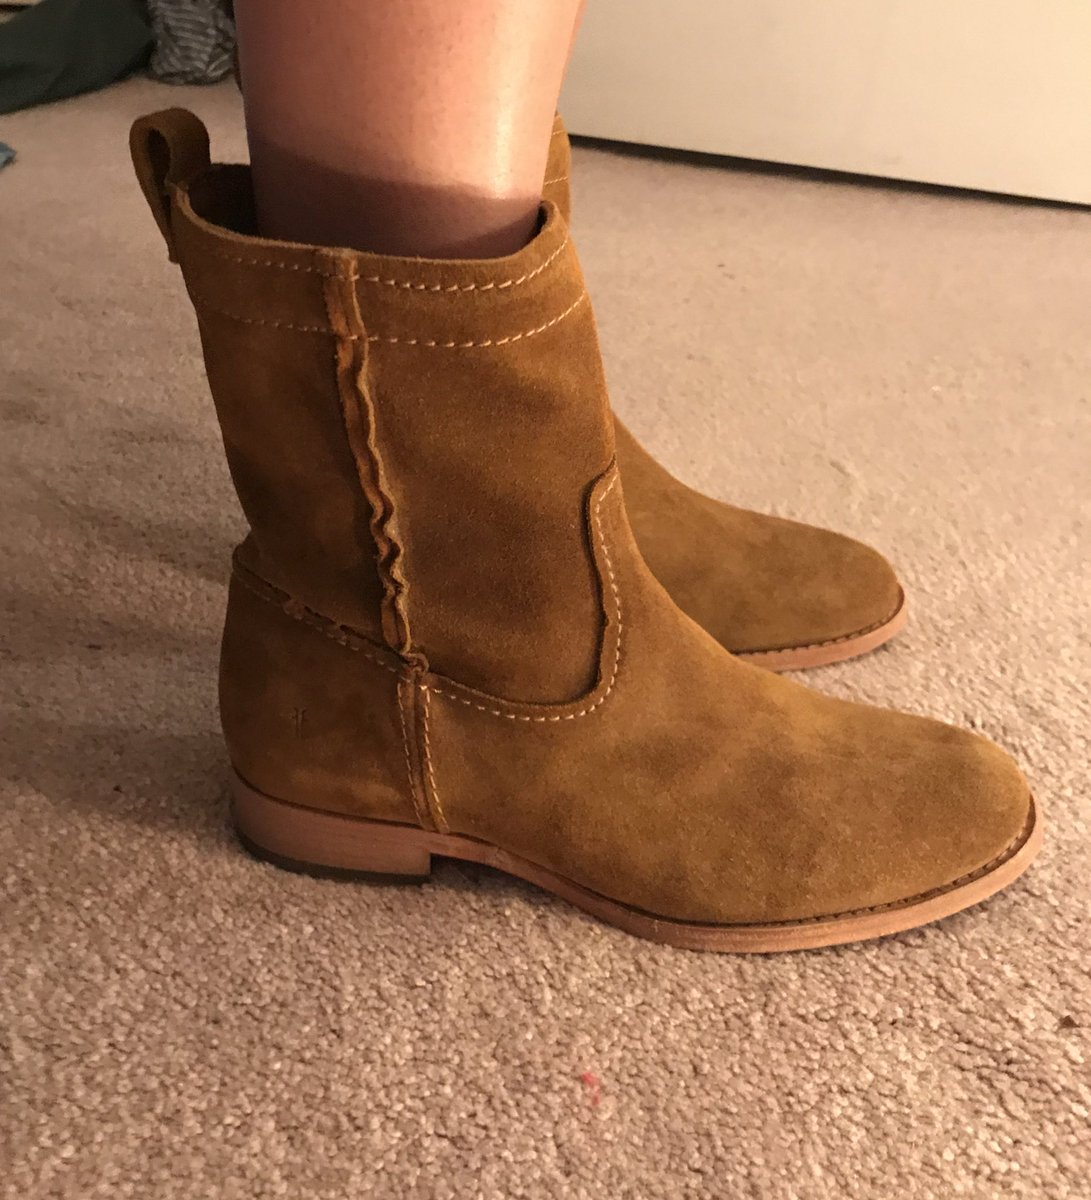 I love my new boots. Three more pairs on the way because I have no limits and boots are life. @FryeBoots